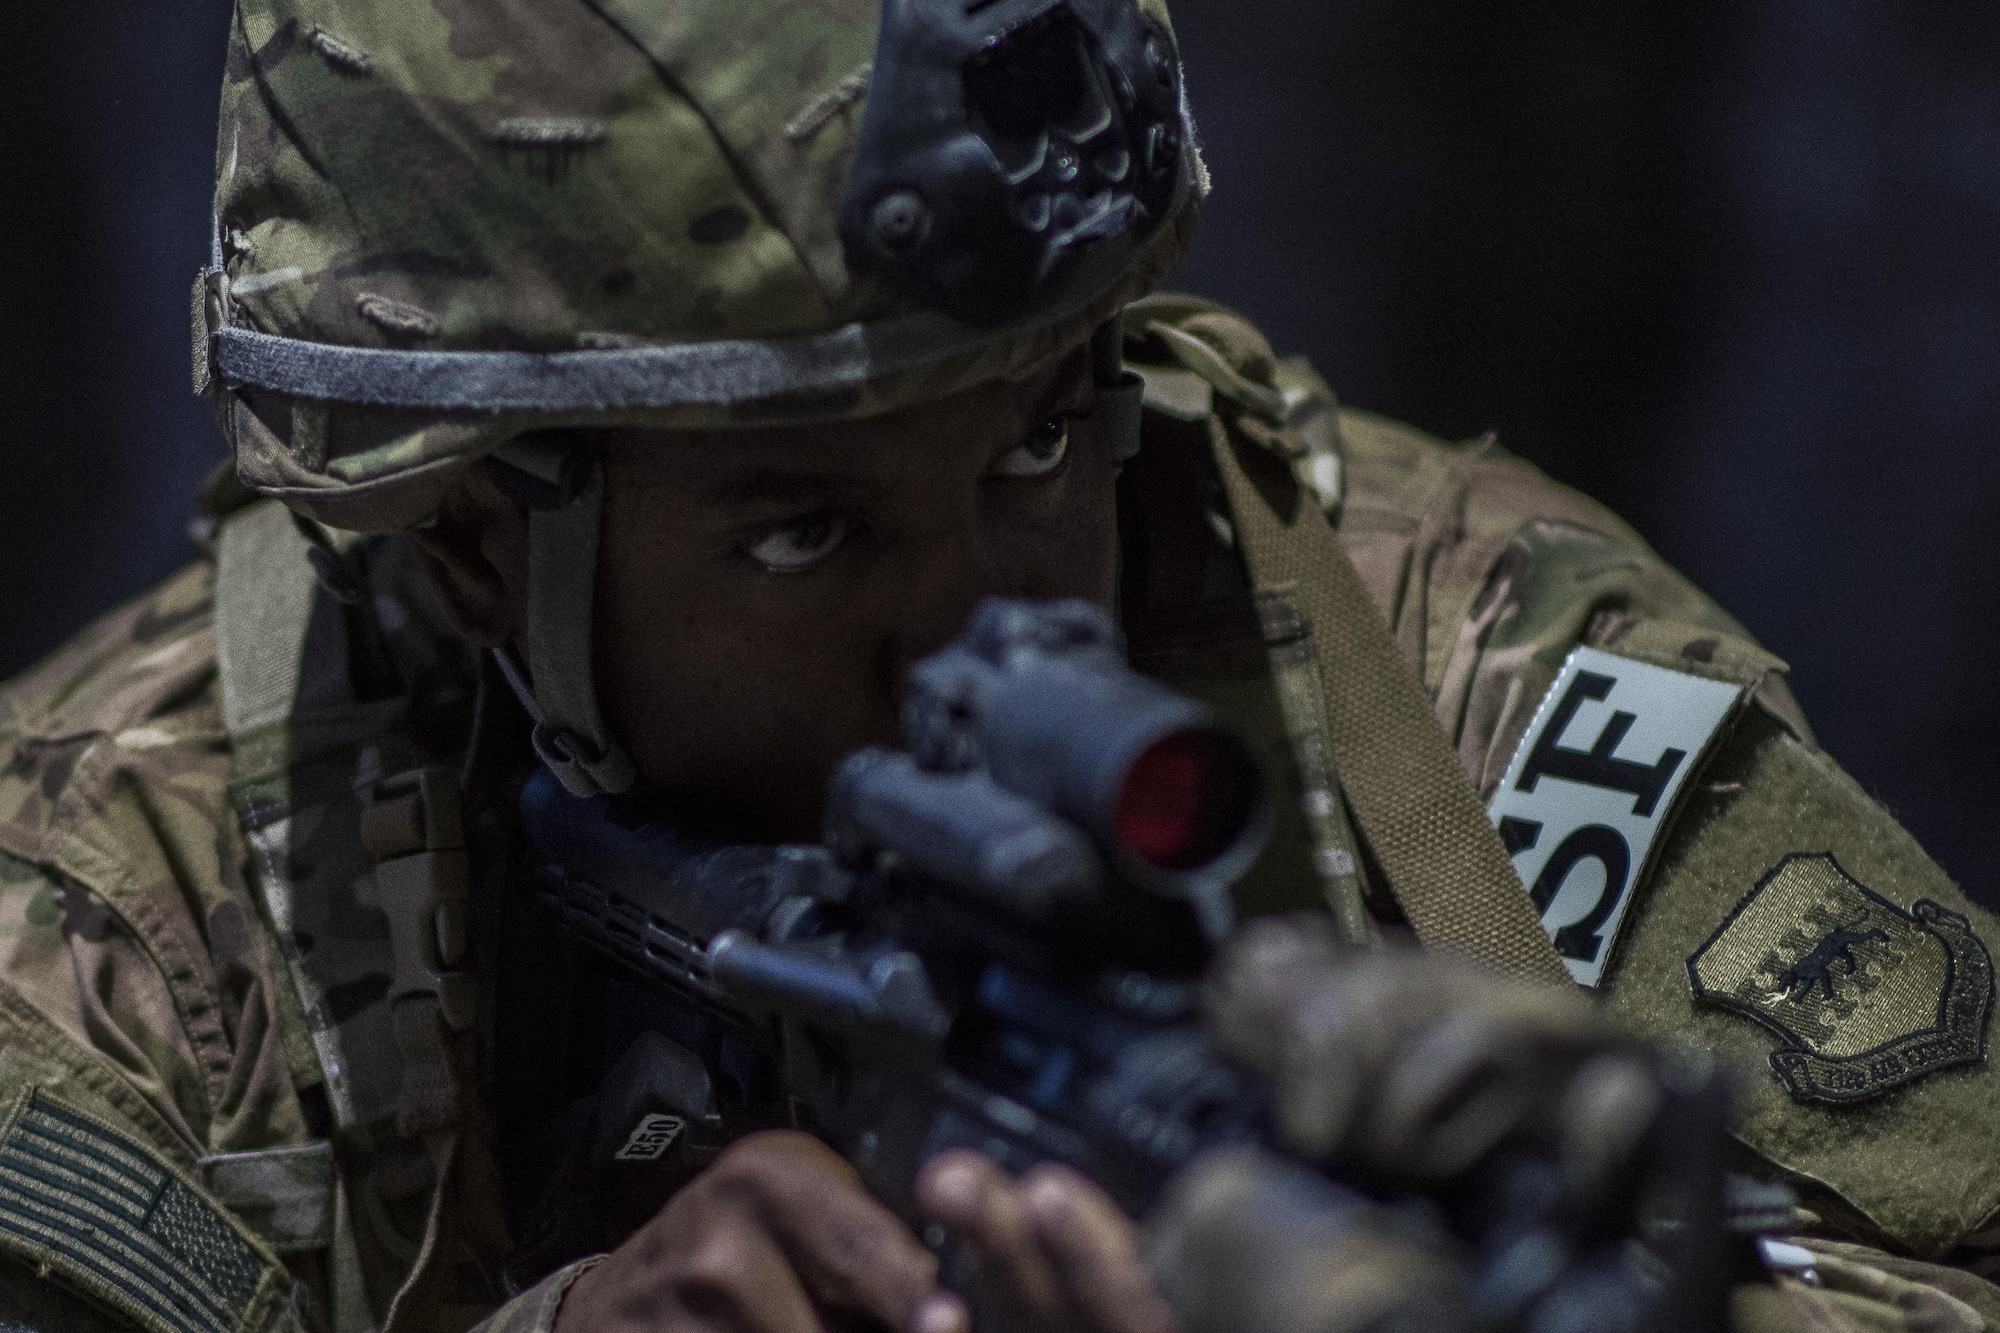 A member of the 332nd Expeditionary Security Forces Squadron takes point during an active-shooter exercise June 8, 2017, in Southwest Asia. The security forces members searched the area for any threats, ensuring the scene was secure before medical teams arrived to treat the simulated victims. (U.S. Air Force photo/Senior Airman Damon Kasberg)